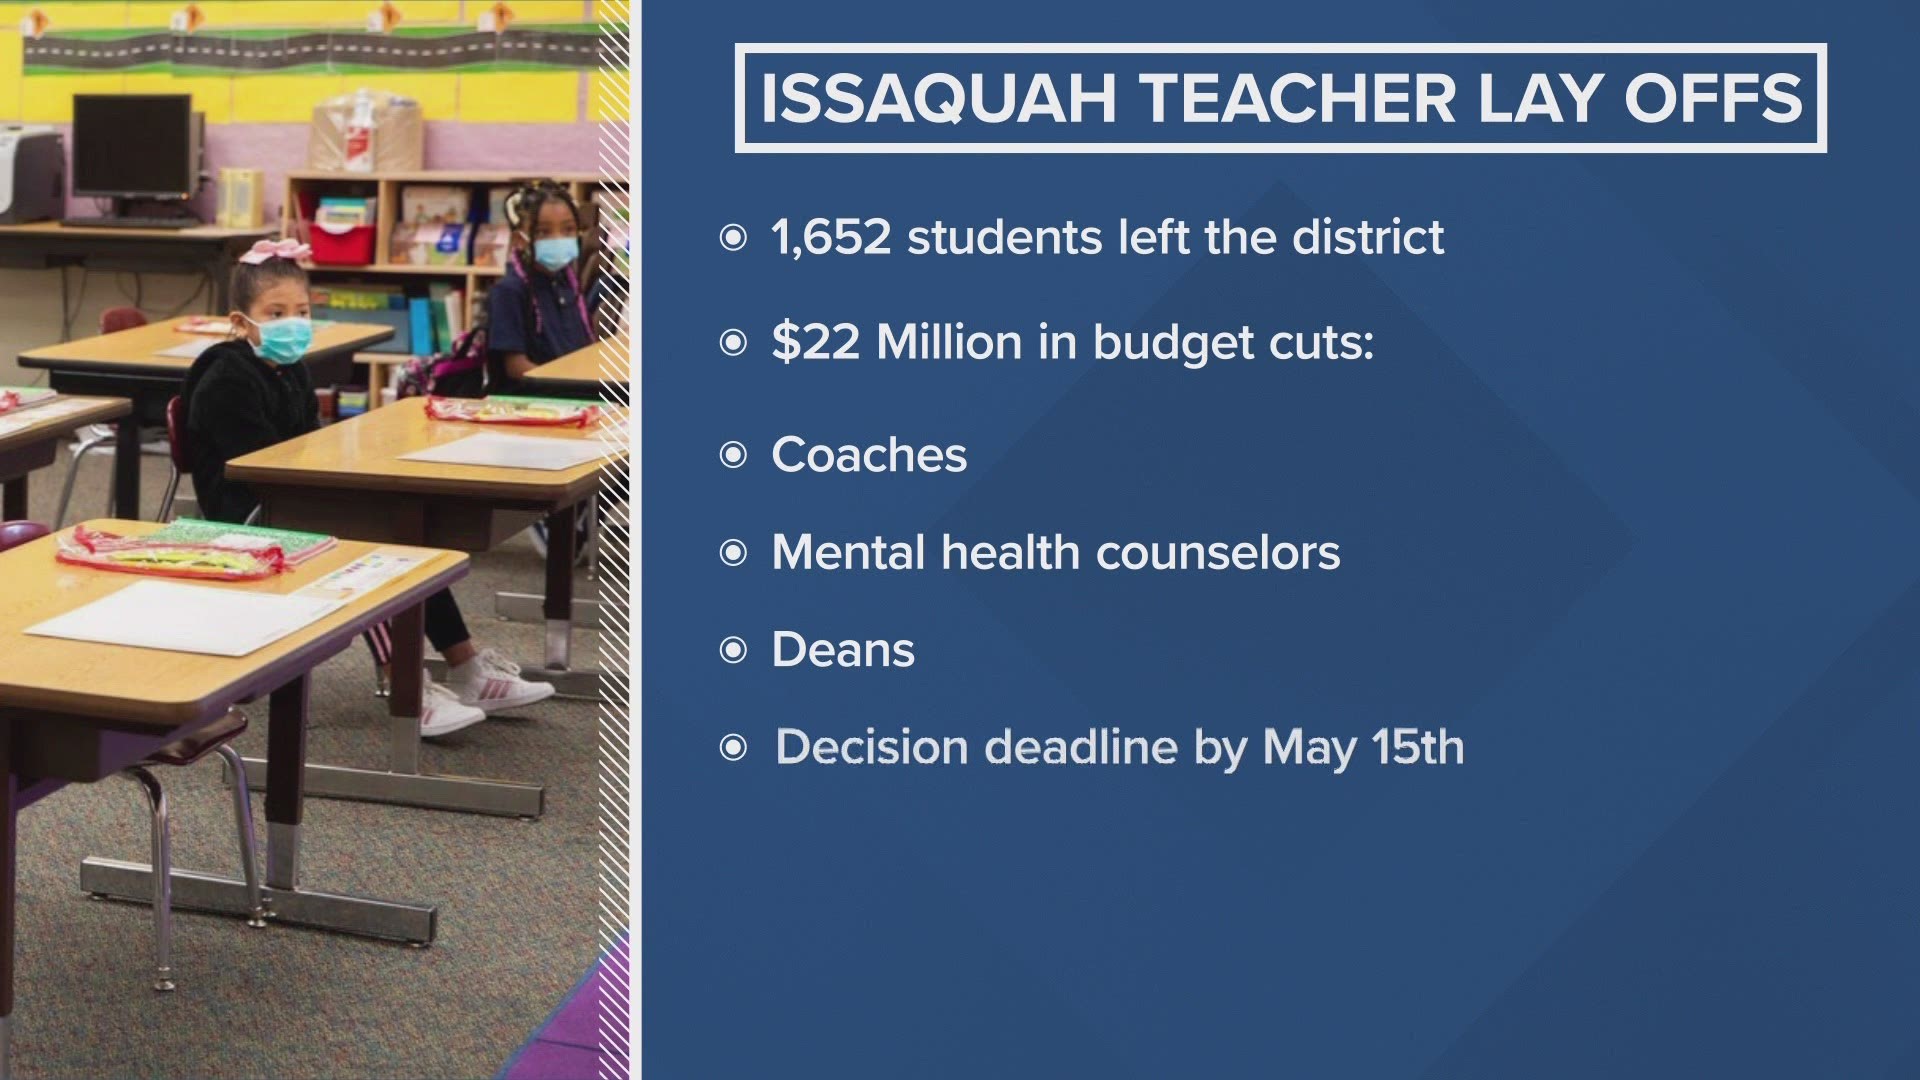 As many as three hundred employees could lose their jobs due to the school district being $22 million in debt